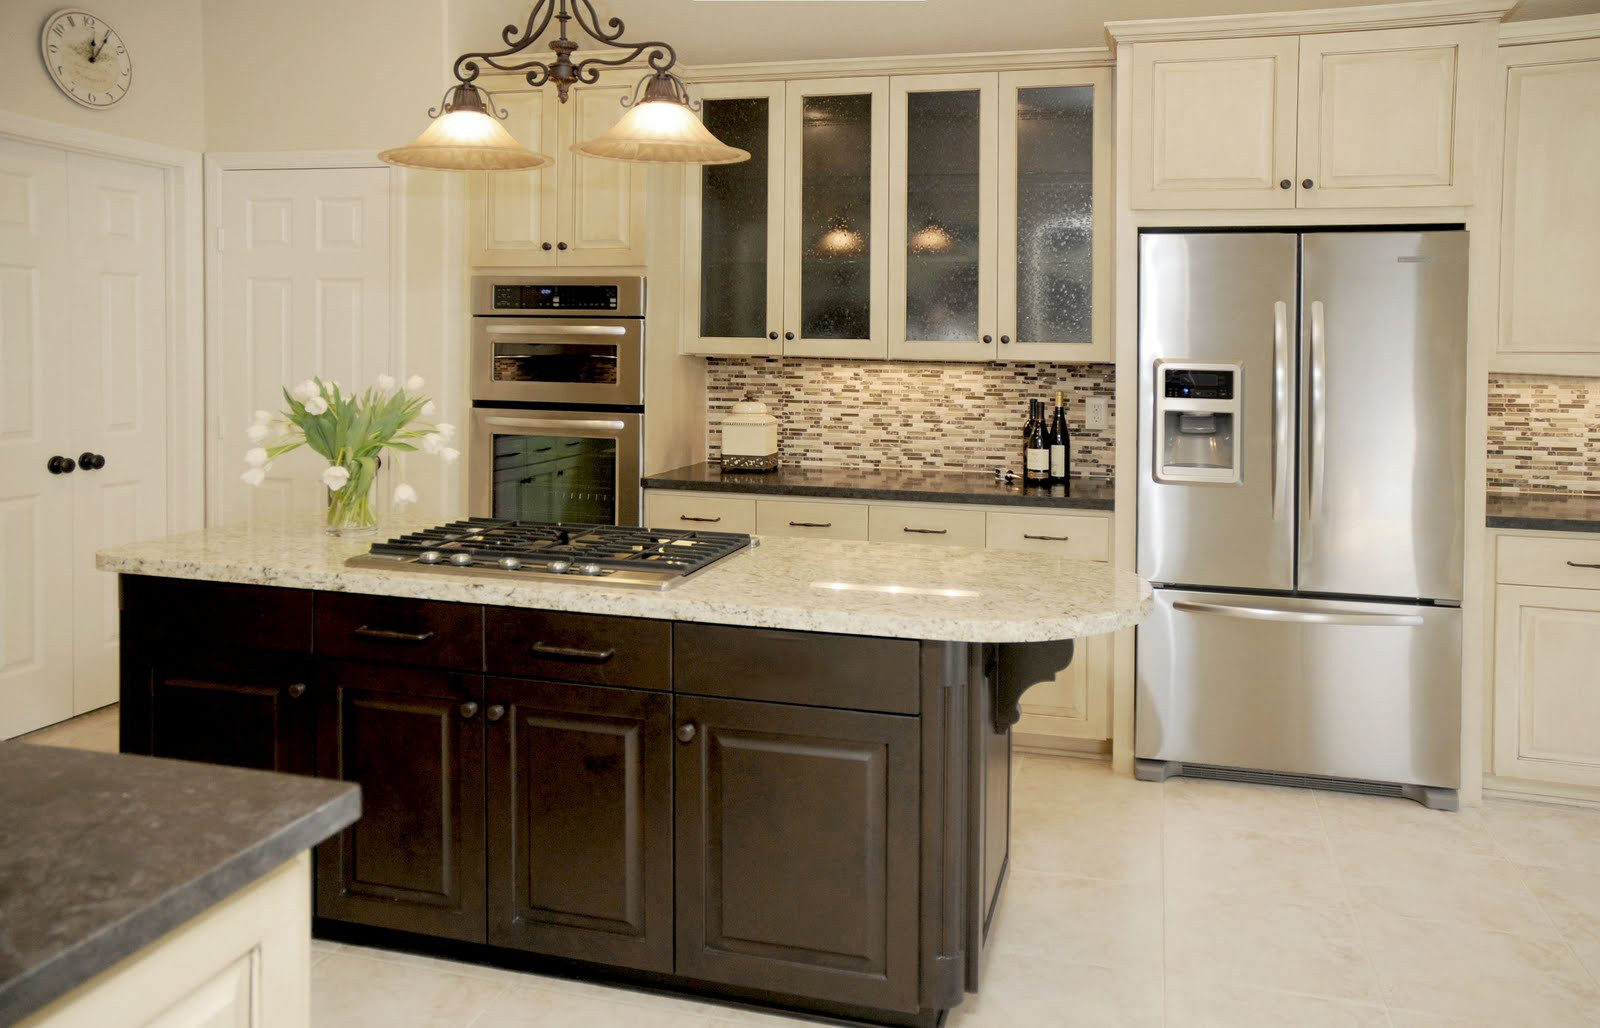 Kitchen Remodels Before And After
 Design in the Woods Kitchen Remodel Before and After